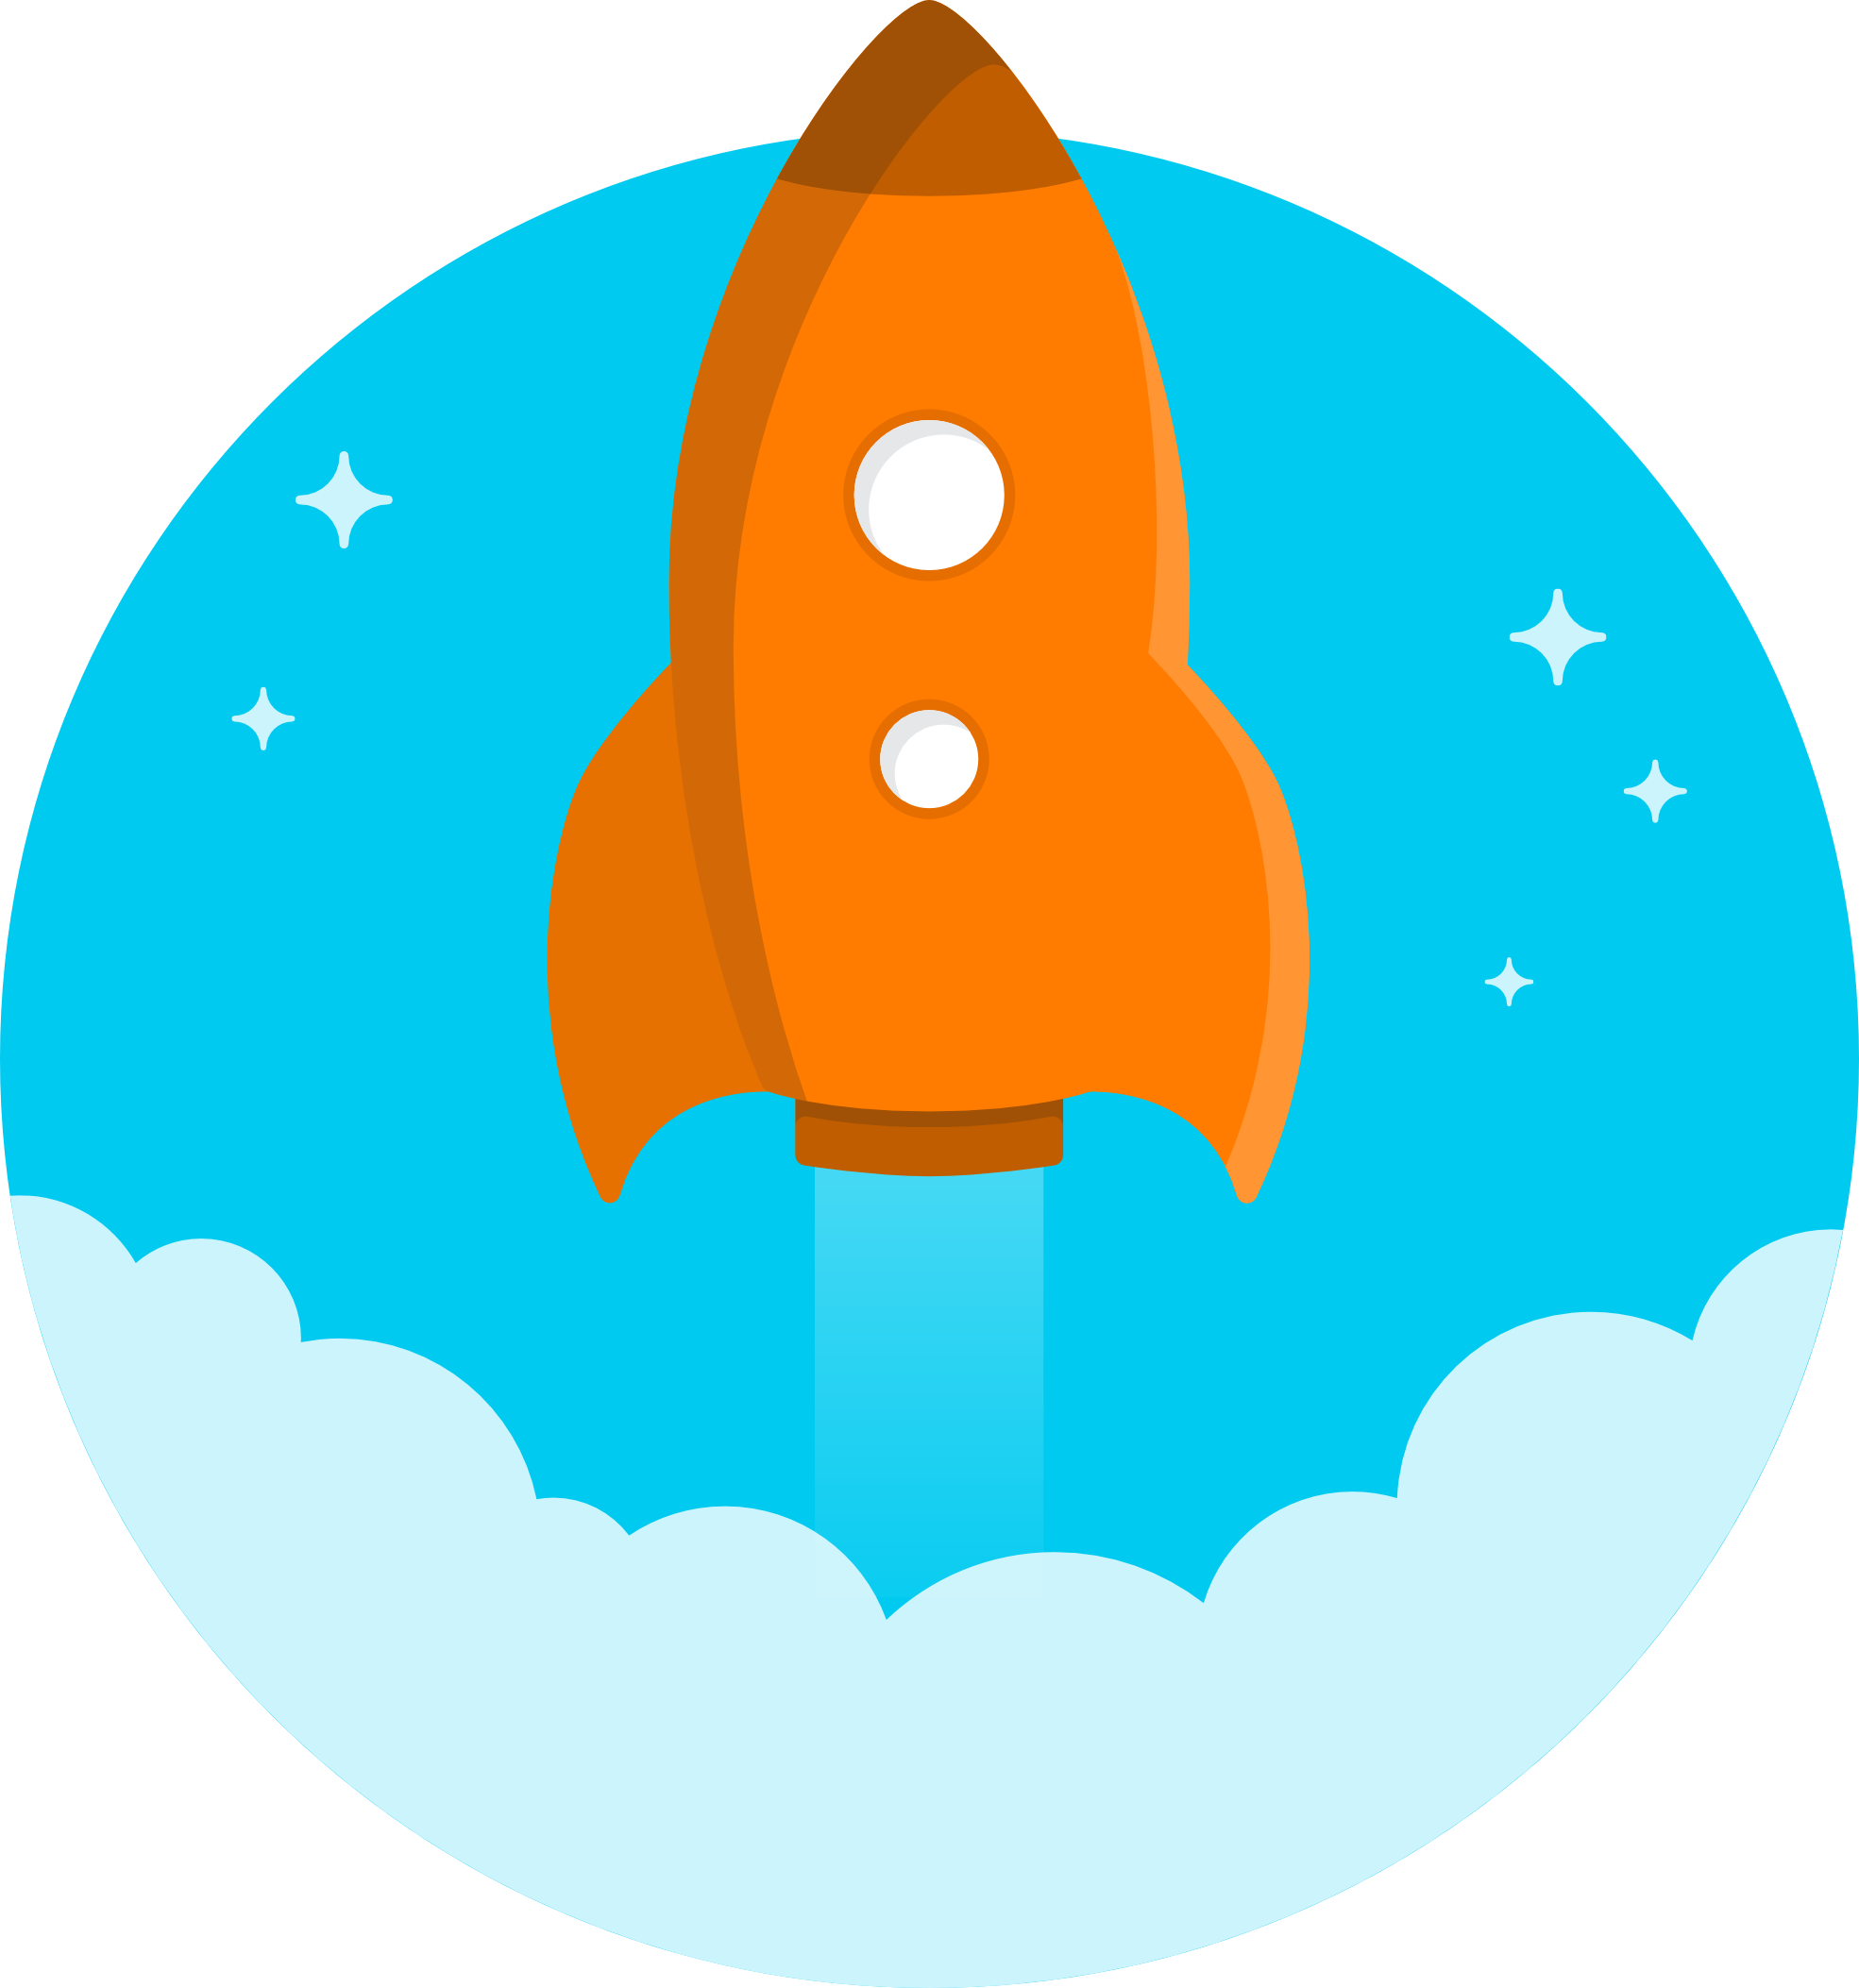 Cool space rocket clip. Hiking clipart adventure theme